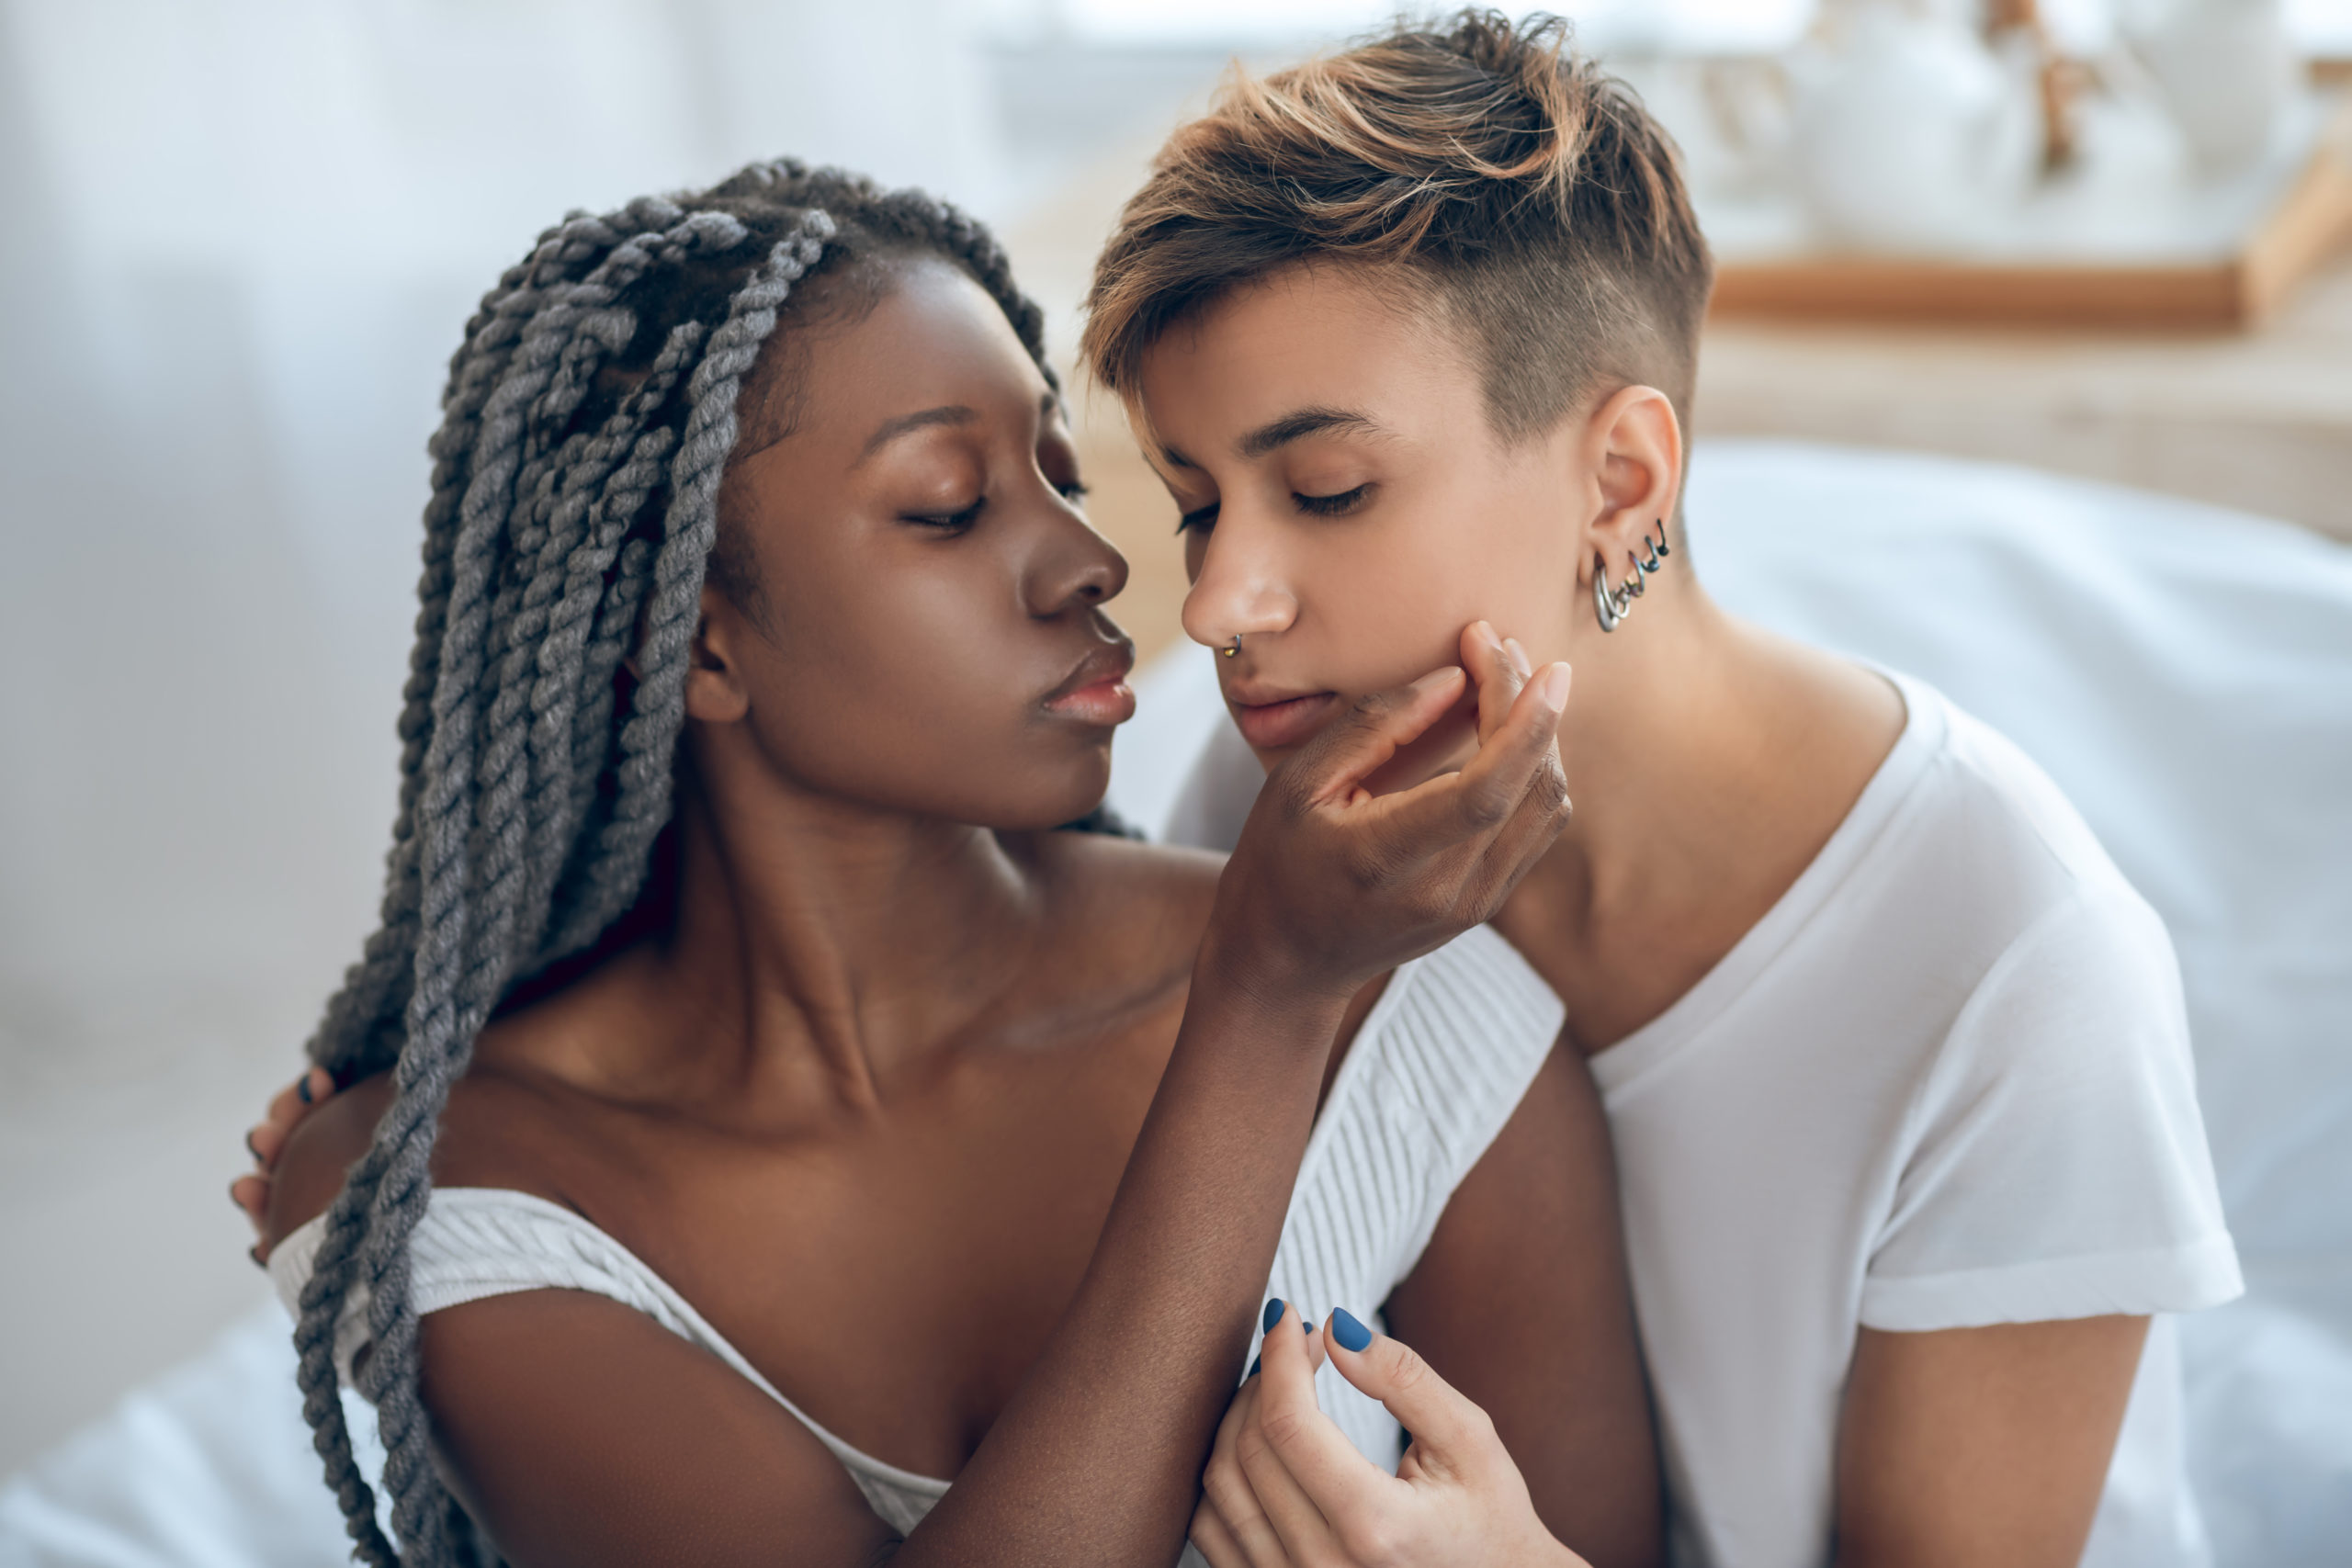 Same sex couple of mixed race connecting and expressing desire for one another.